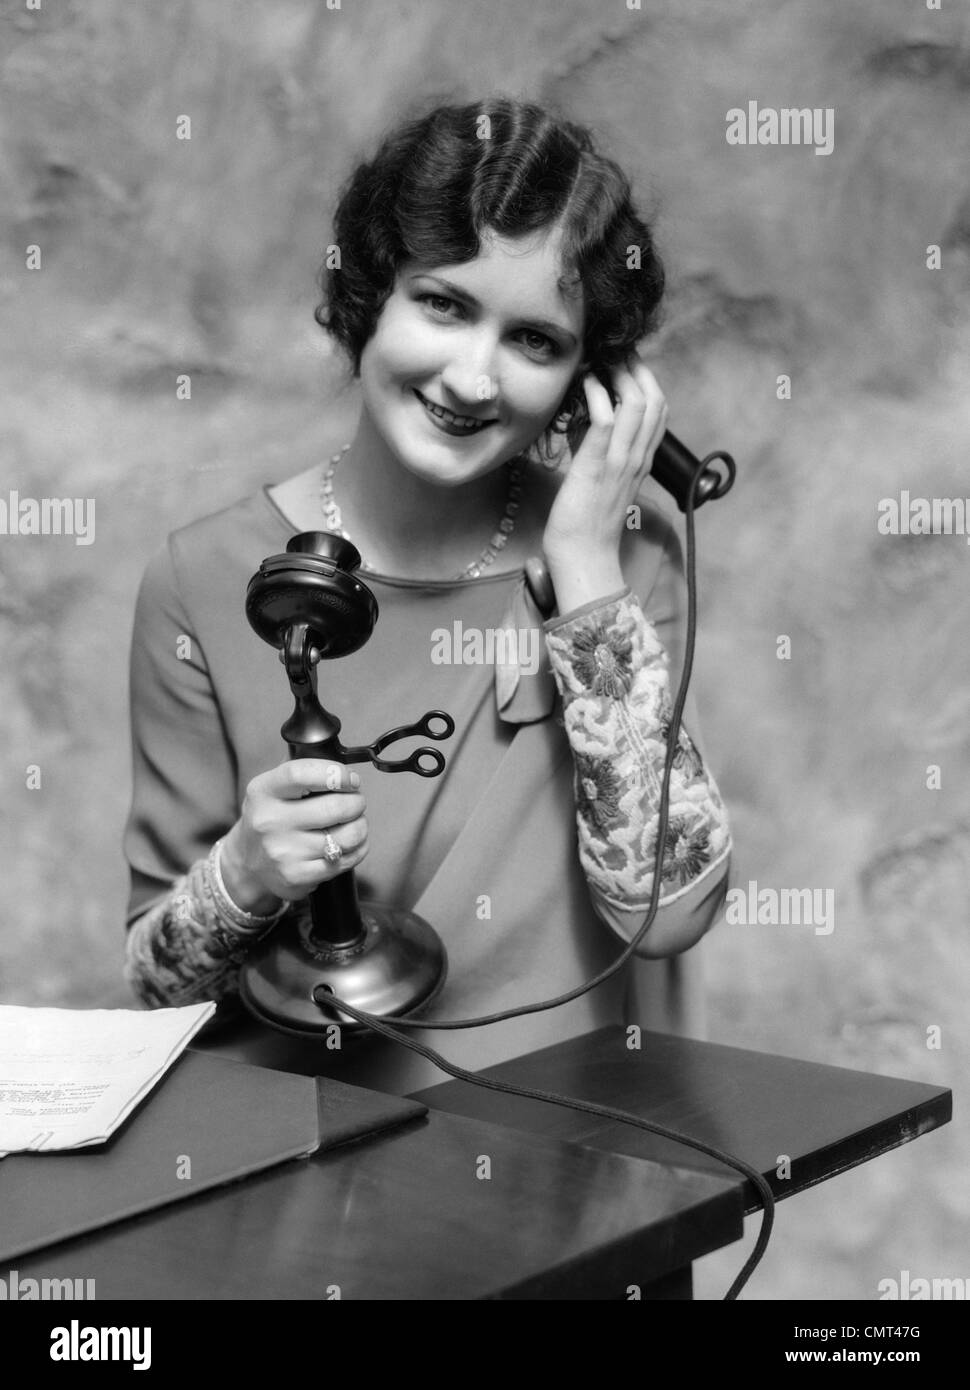 1920s PORTRAIT OF WOMAN ON CANDLESTICK TELEPHONE SMILING LOOKING AT CAMERA Stock Photo